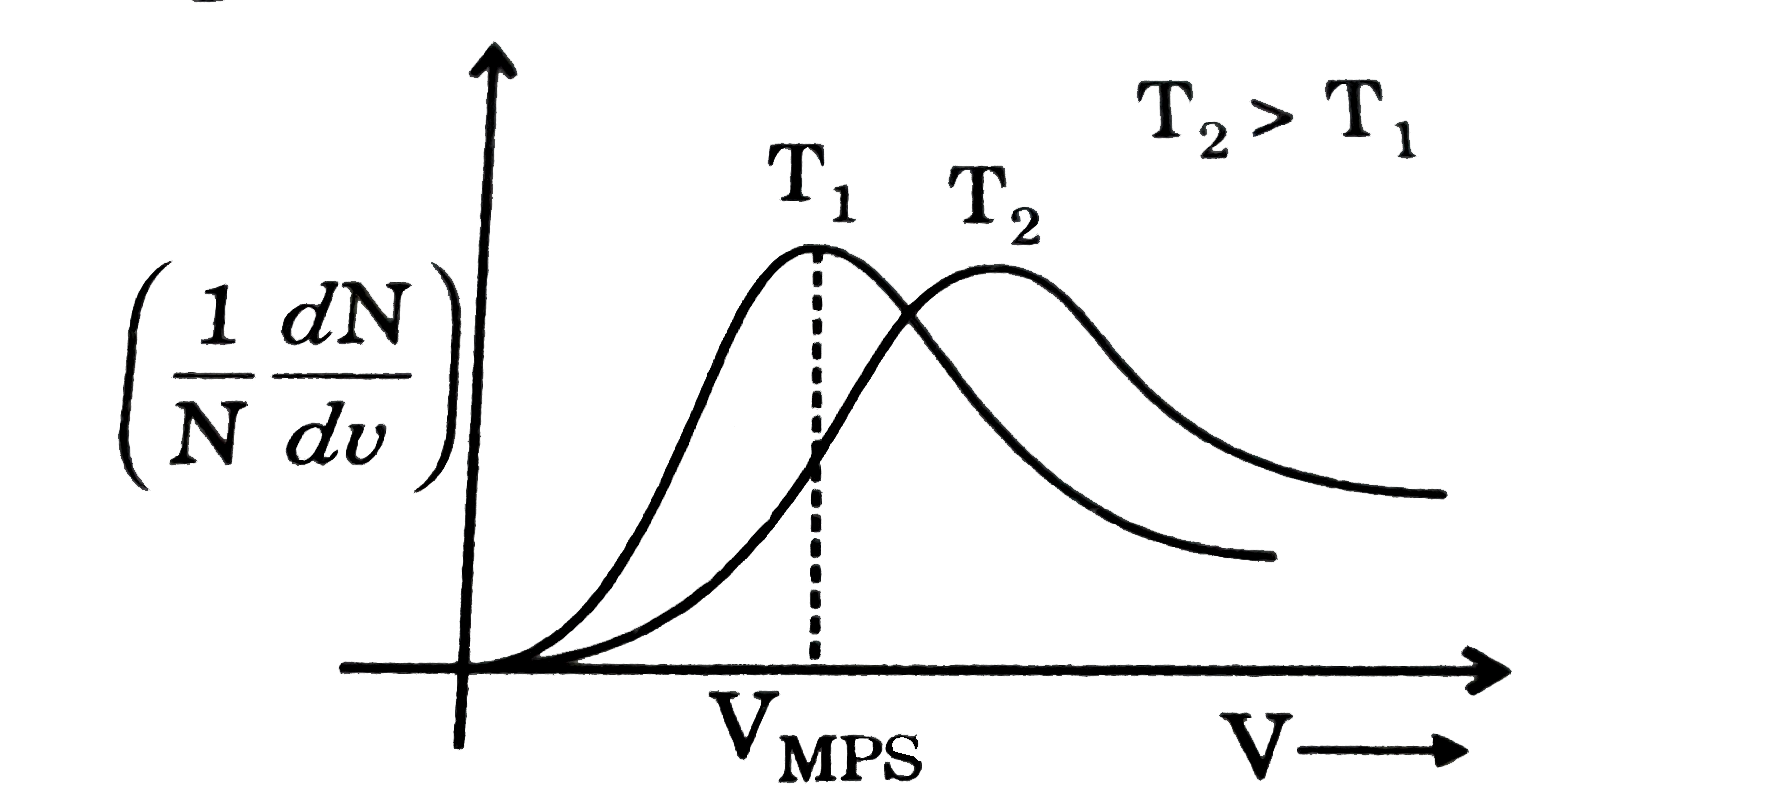 The speed of a molecule of a gas changes continuously as a result of collisions with other molecules and with the walls of the container. The speeds of individual molecules therefore change with time.   A direct consequence of the distribution of speeds is that the average kinetric energy is constant for a given temperature.   The average K.E. is defined as   bar(KE) =1/N((1)/(2)m underset(i)SigmadN(i)u(1)^(2)) = 1/2 m(underset(i)Sigma(dN(i))/(N).u(1)^(2))   where (dN)/(N) is the fraction of molecules having speeds between u(i) and u(i) + du and as proposed by maxwell (dN)/(N) = 4pi ((m)/(2pi KT))^(3//2) exp (-(